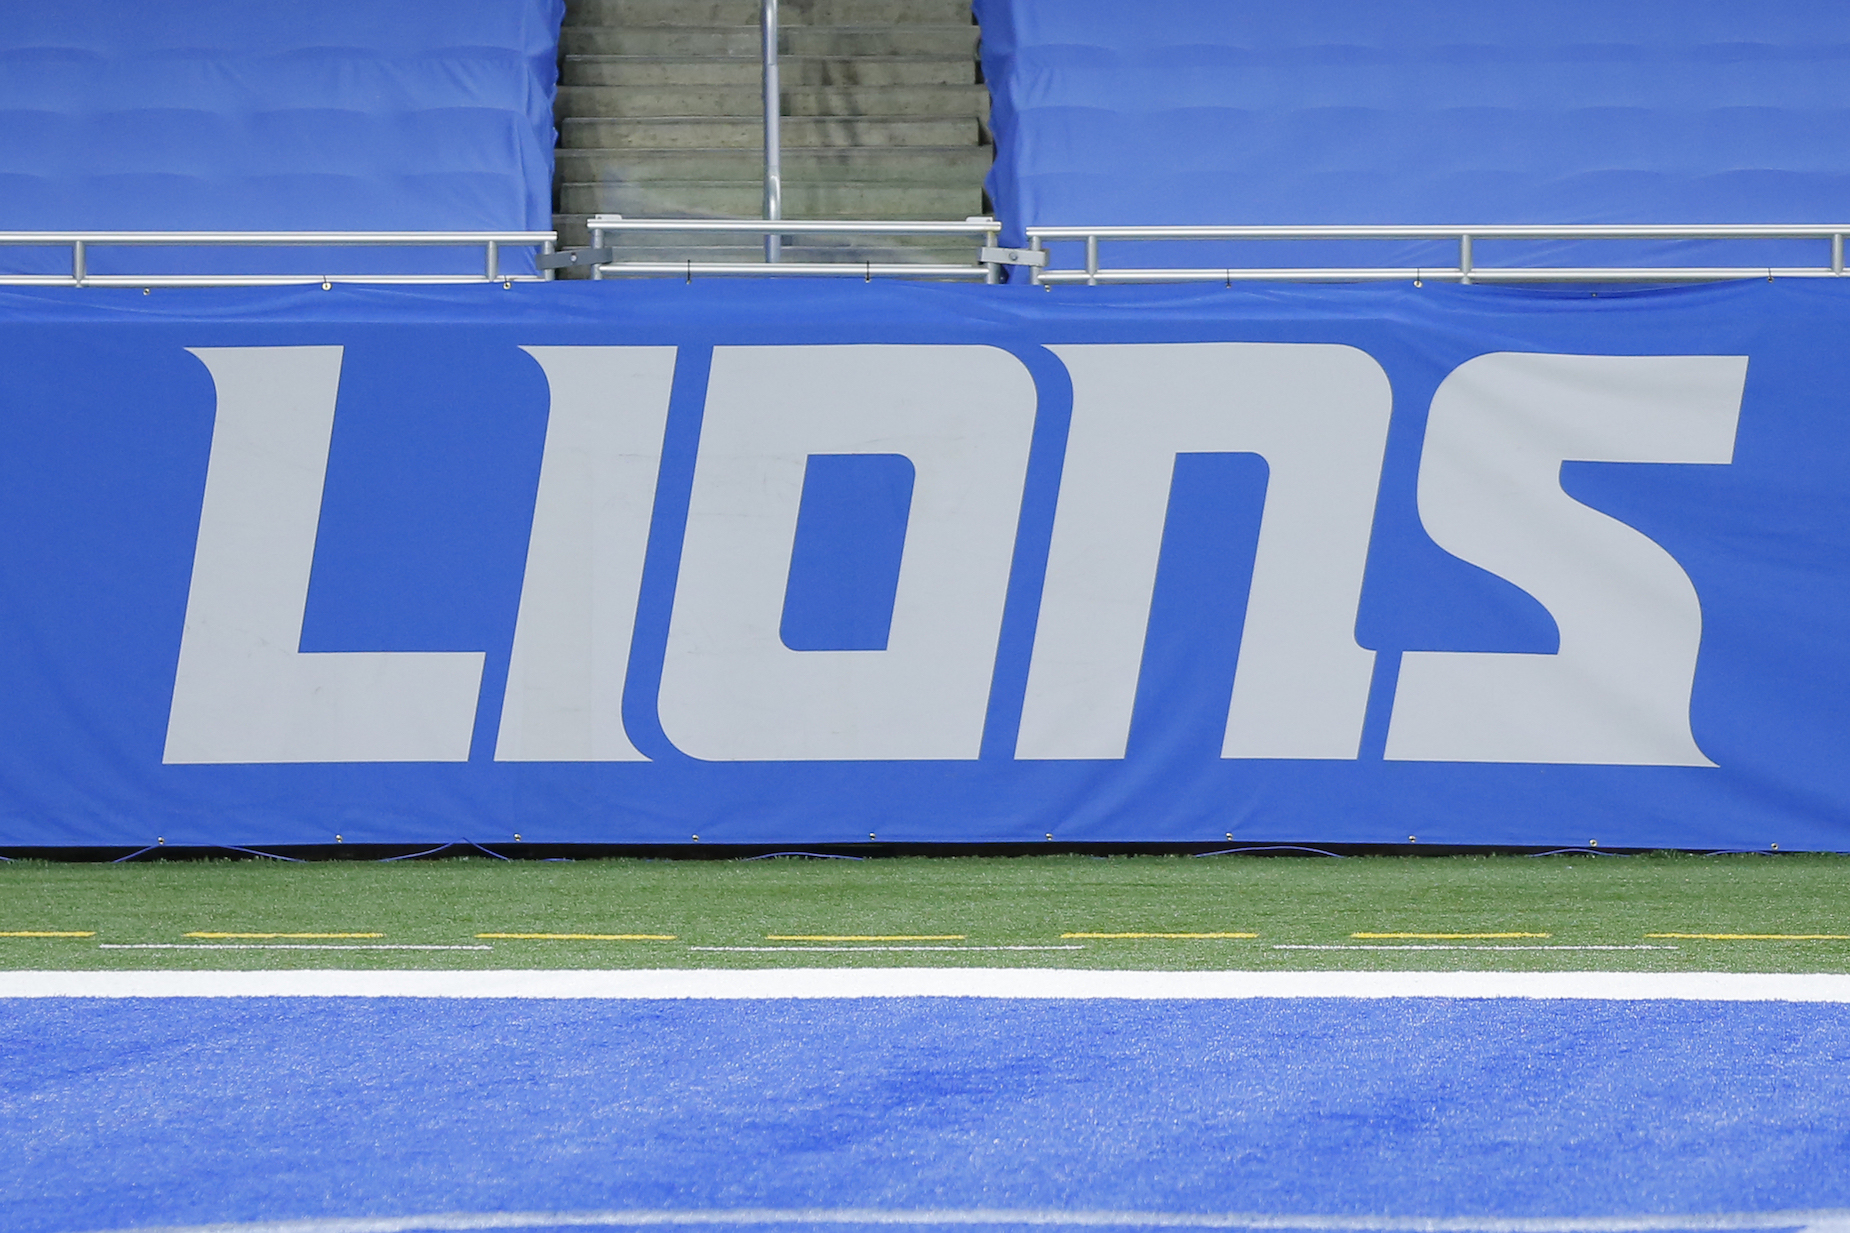 The Detroit Lions haven't won a championship since the 1950s, but are still worth more than $2 billion to their owners.